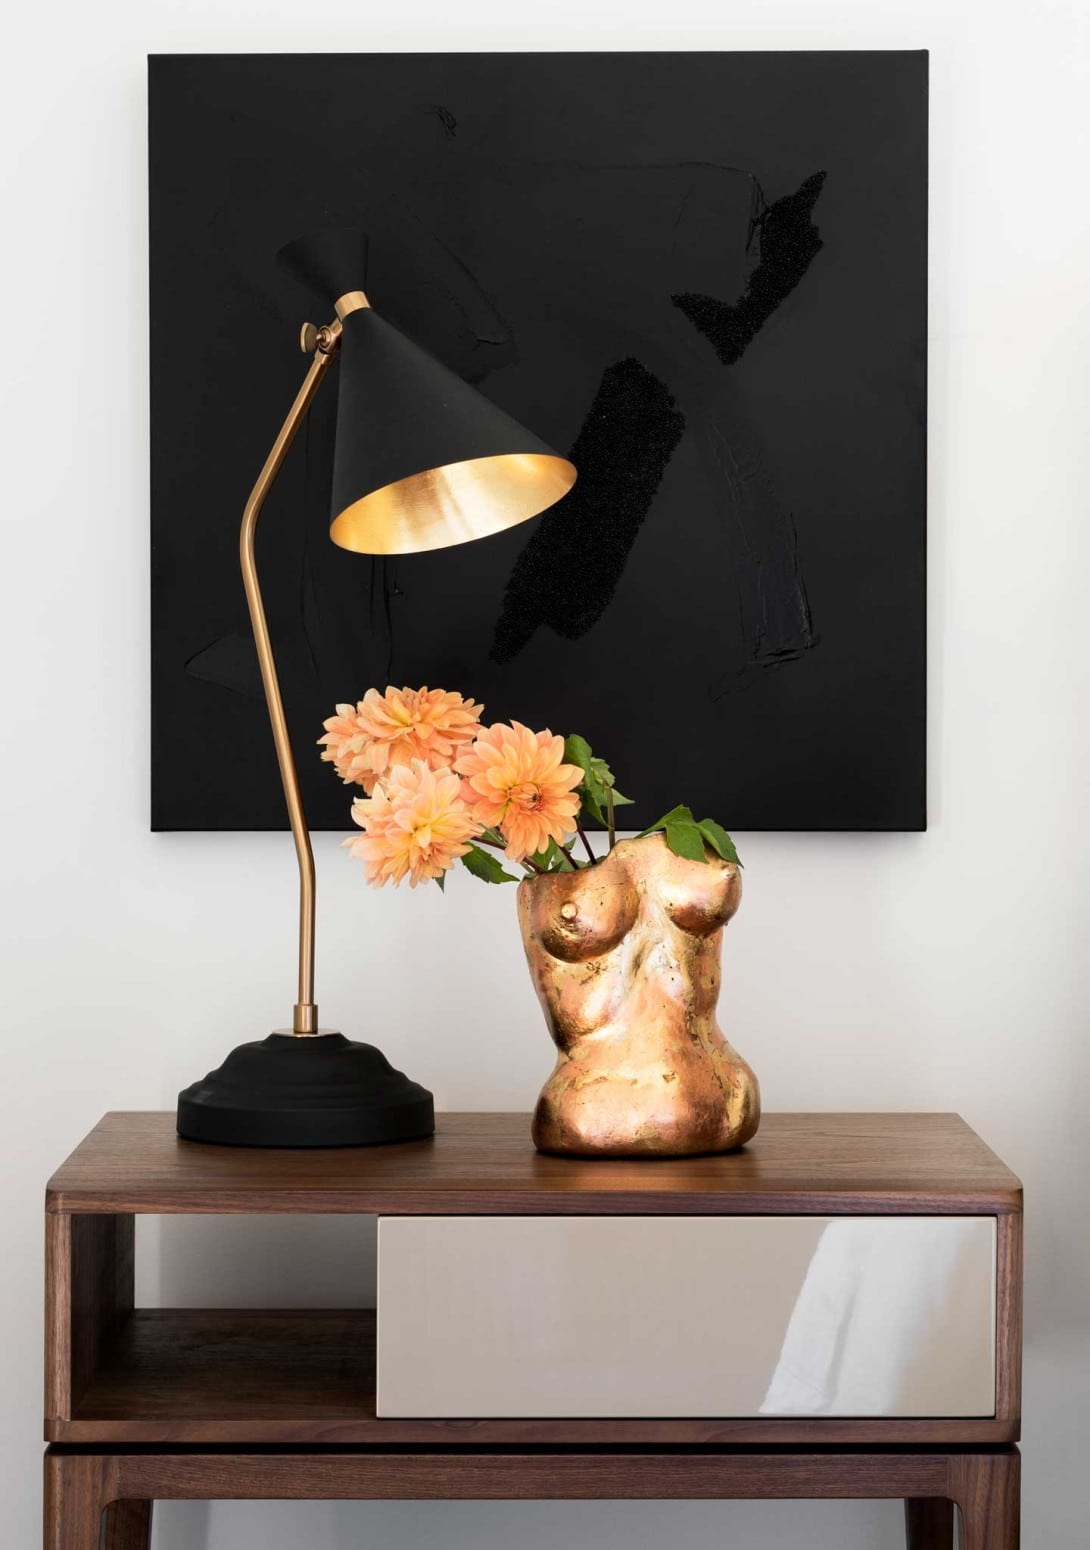 Matte black and Gold Brass DOMO Home: Modernist Table Lamp